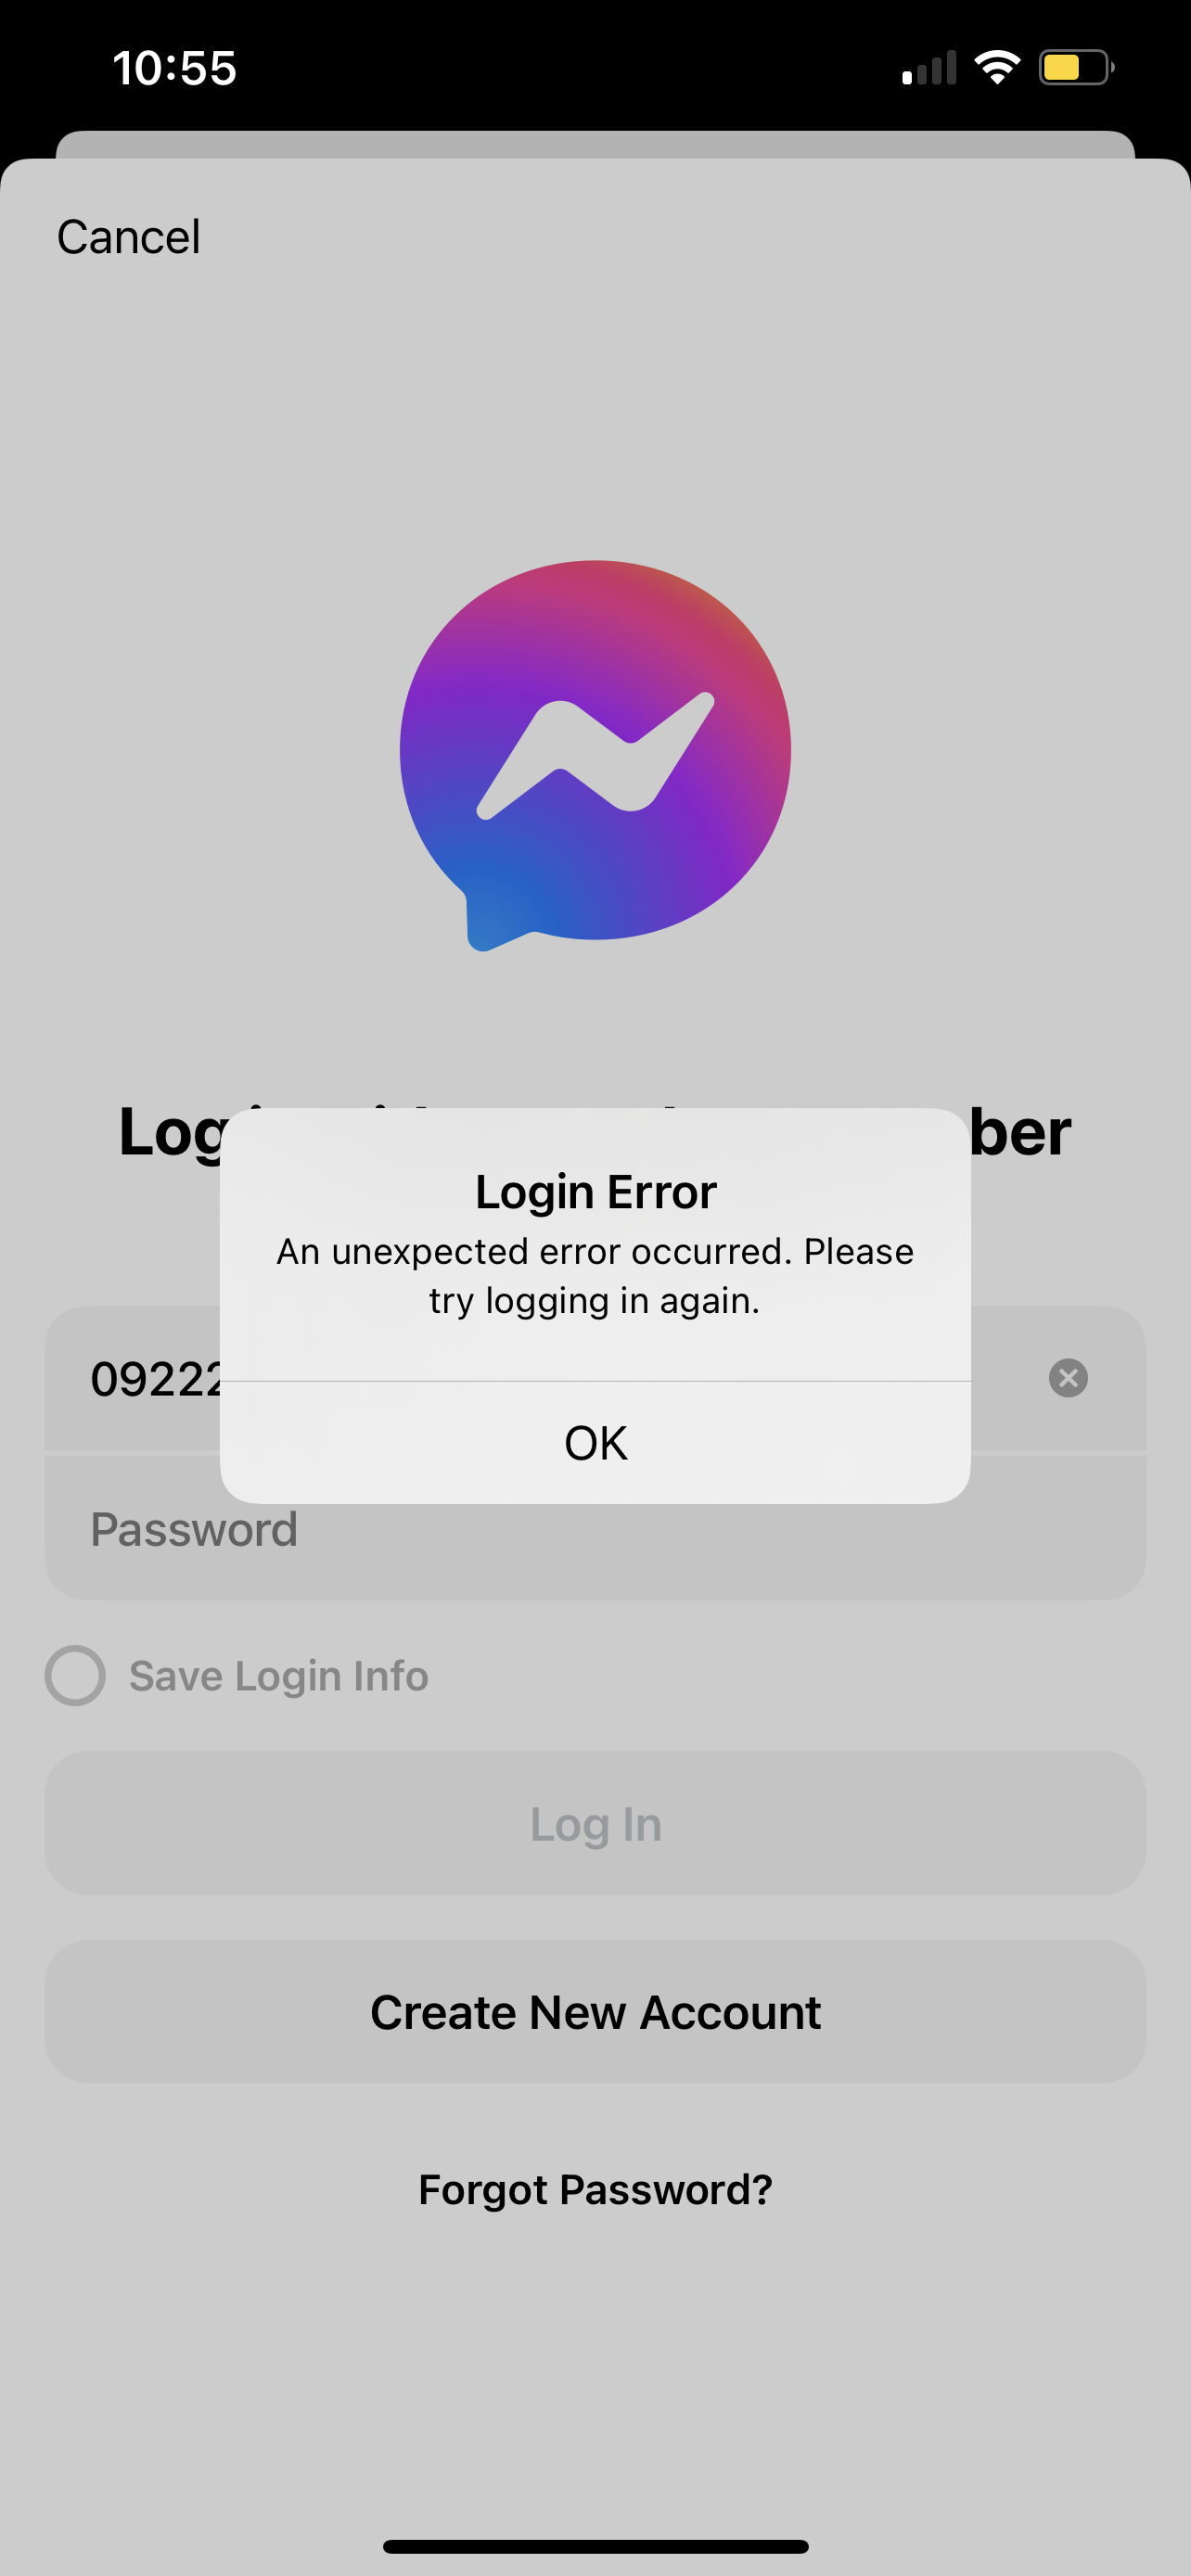 iphone - facebook login give me already authorized this app without  automatic returning to the app - Stack Overflow